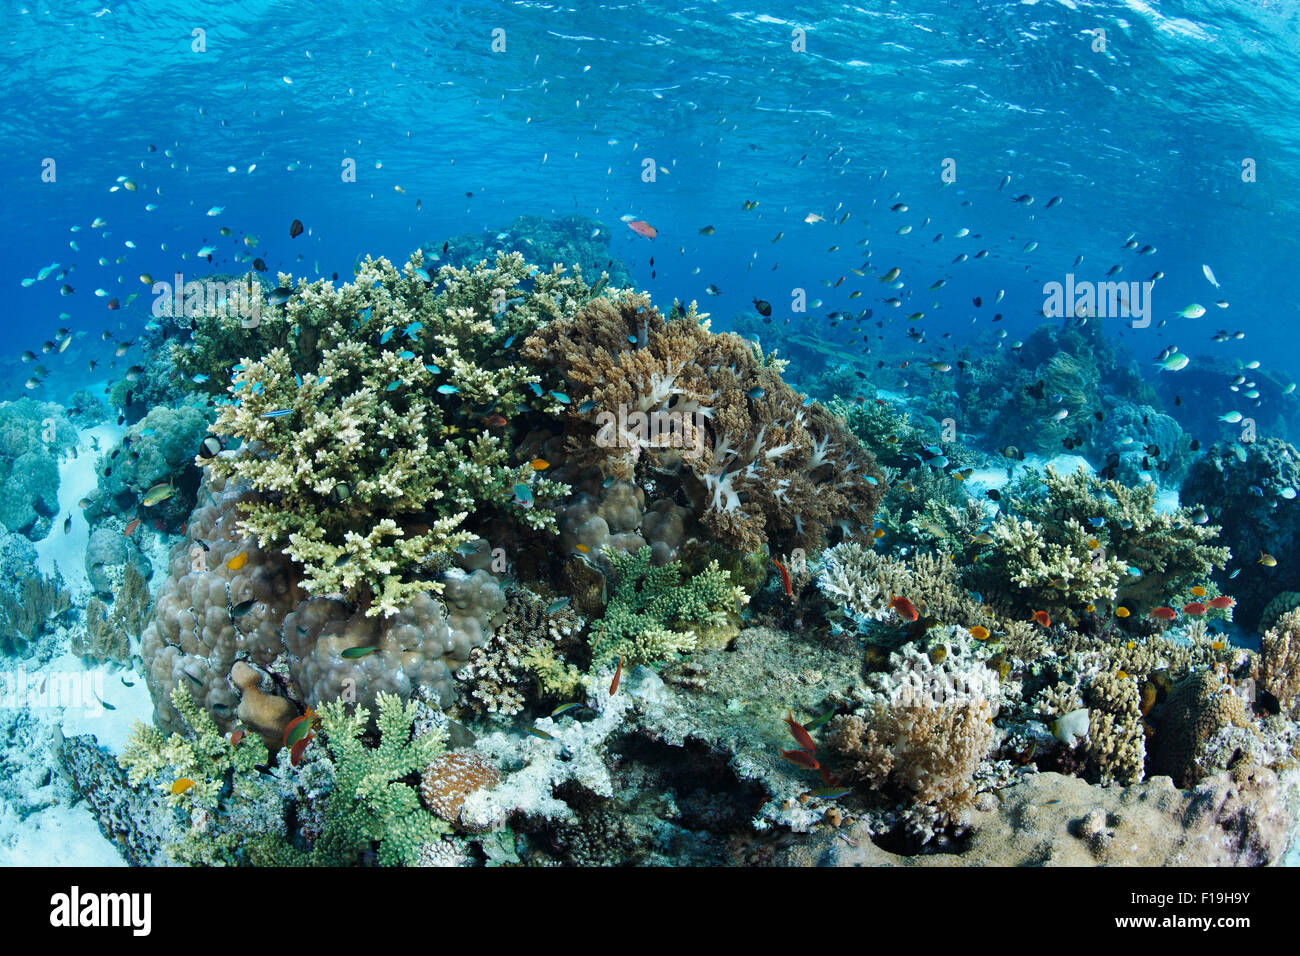 px0679-D. shallow reef with many species of corals and fish. Indonesia, tropical Pacific Ocean. Photo Copyright © Brandon Cole. Stock Photo